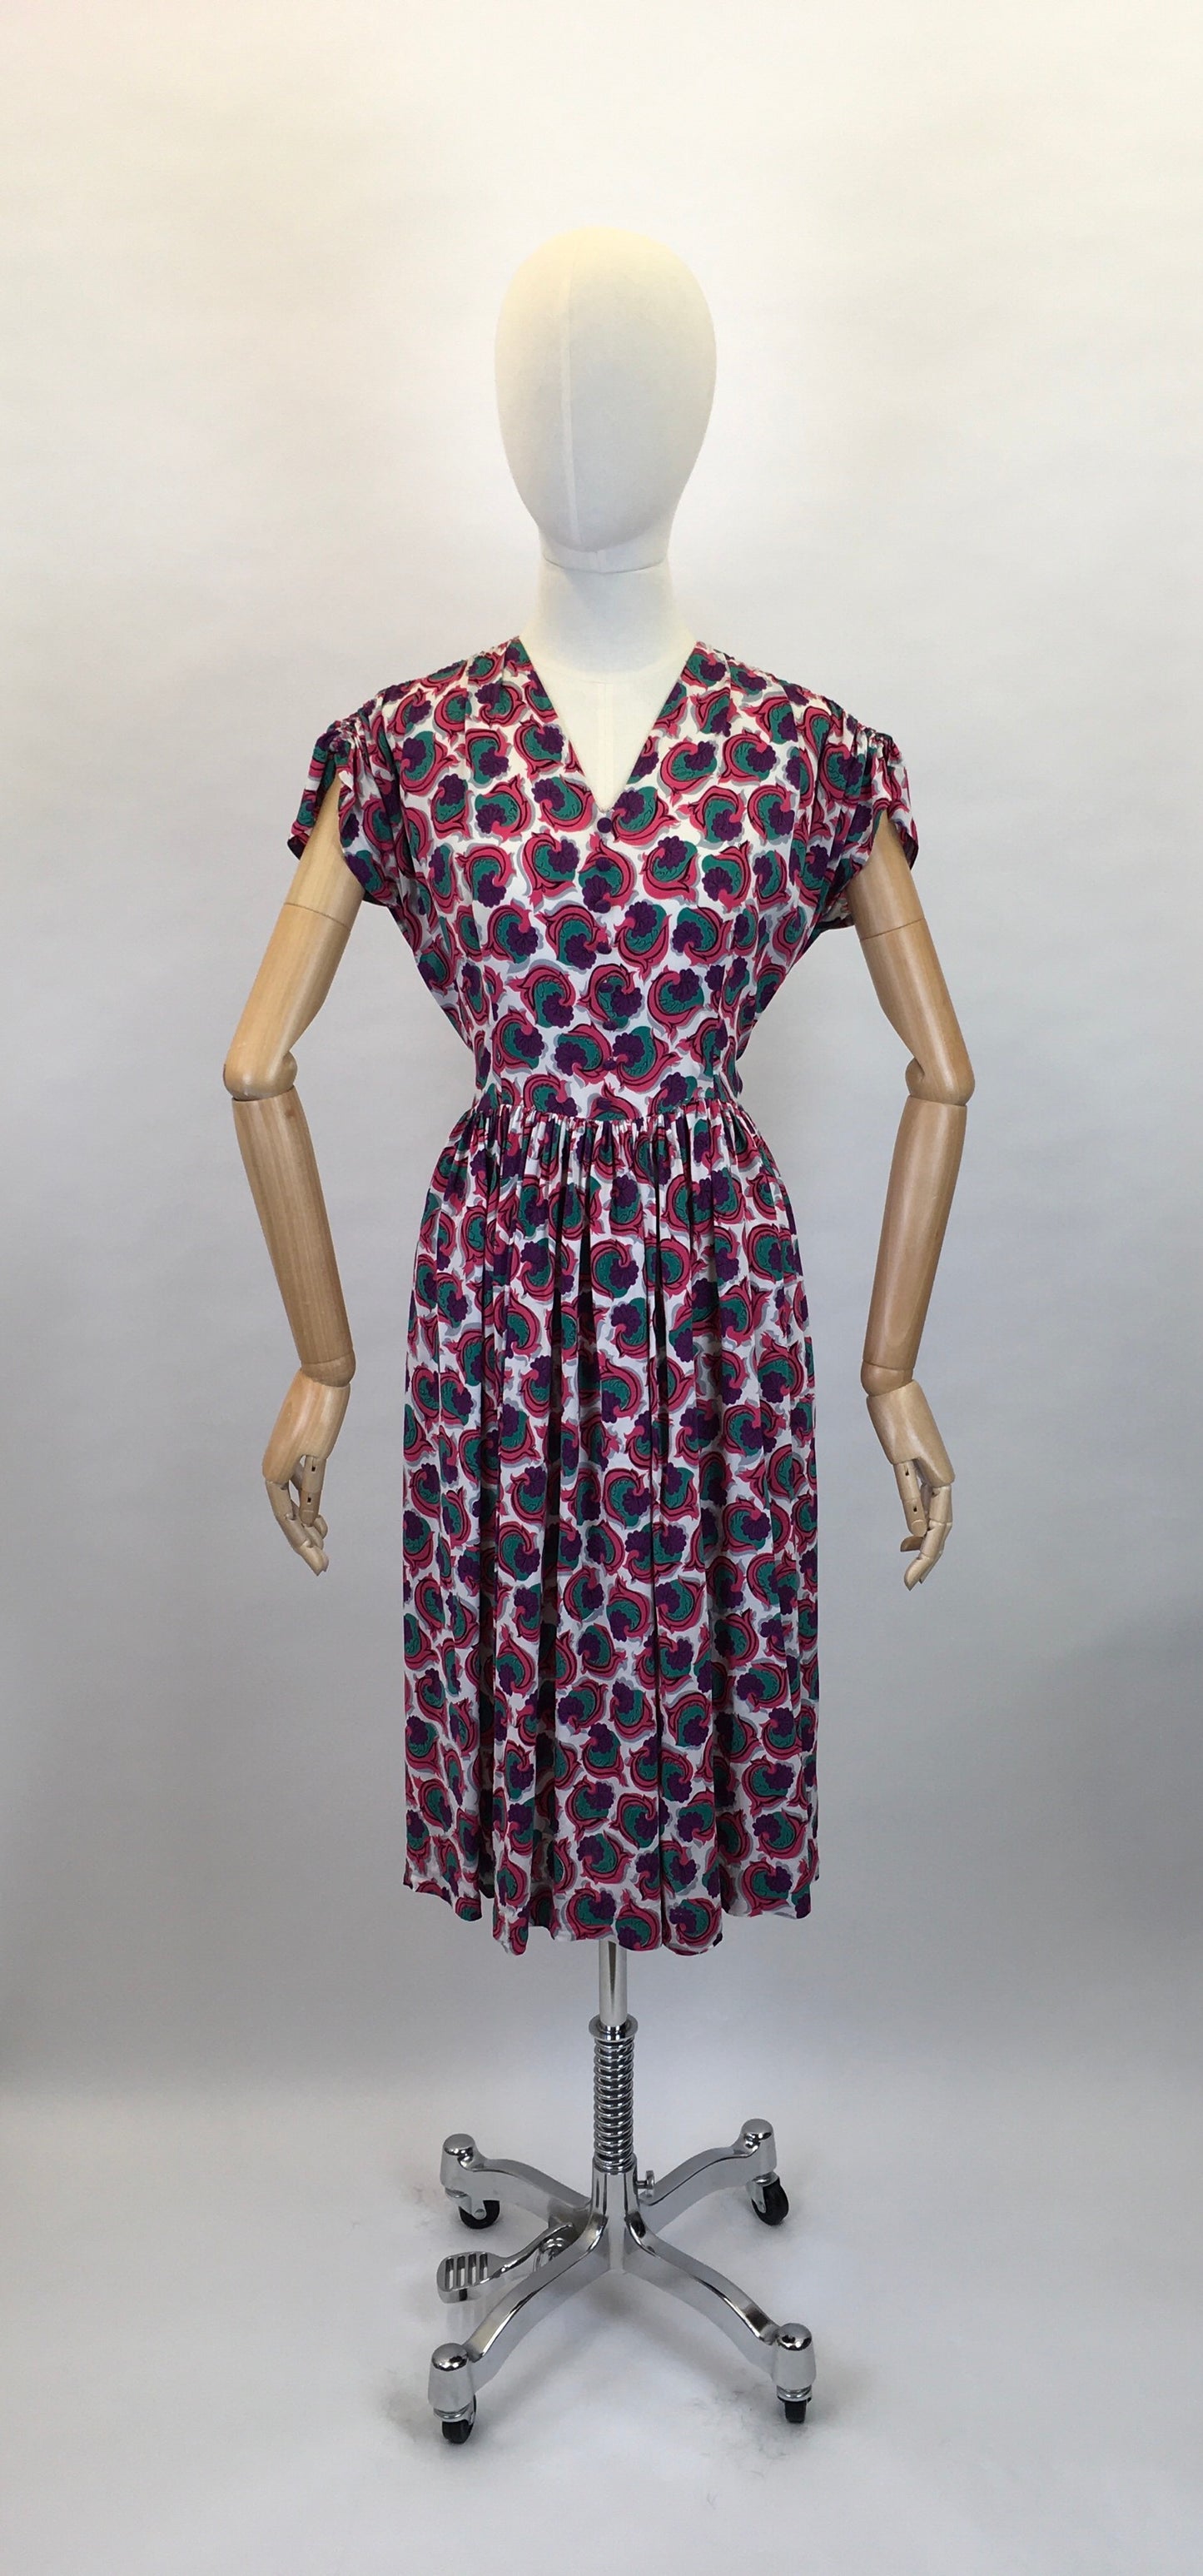 Original 1940s Crepe De Chine Dress - In a Beautiful Pallet of Rich Purples, Pinks and Jade Green